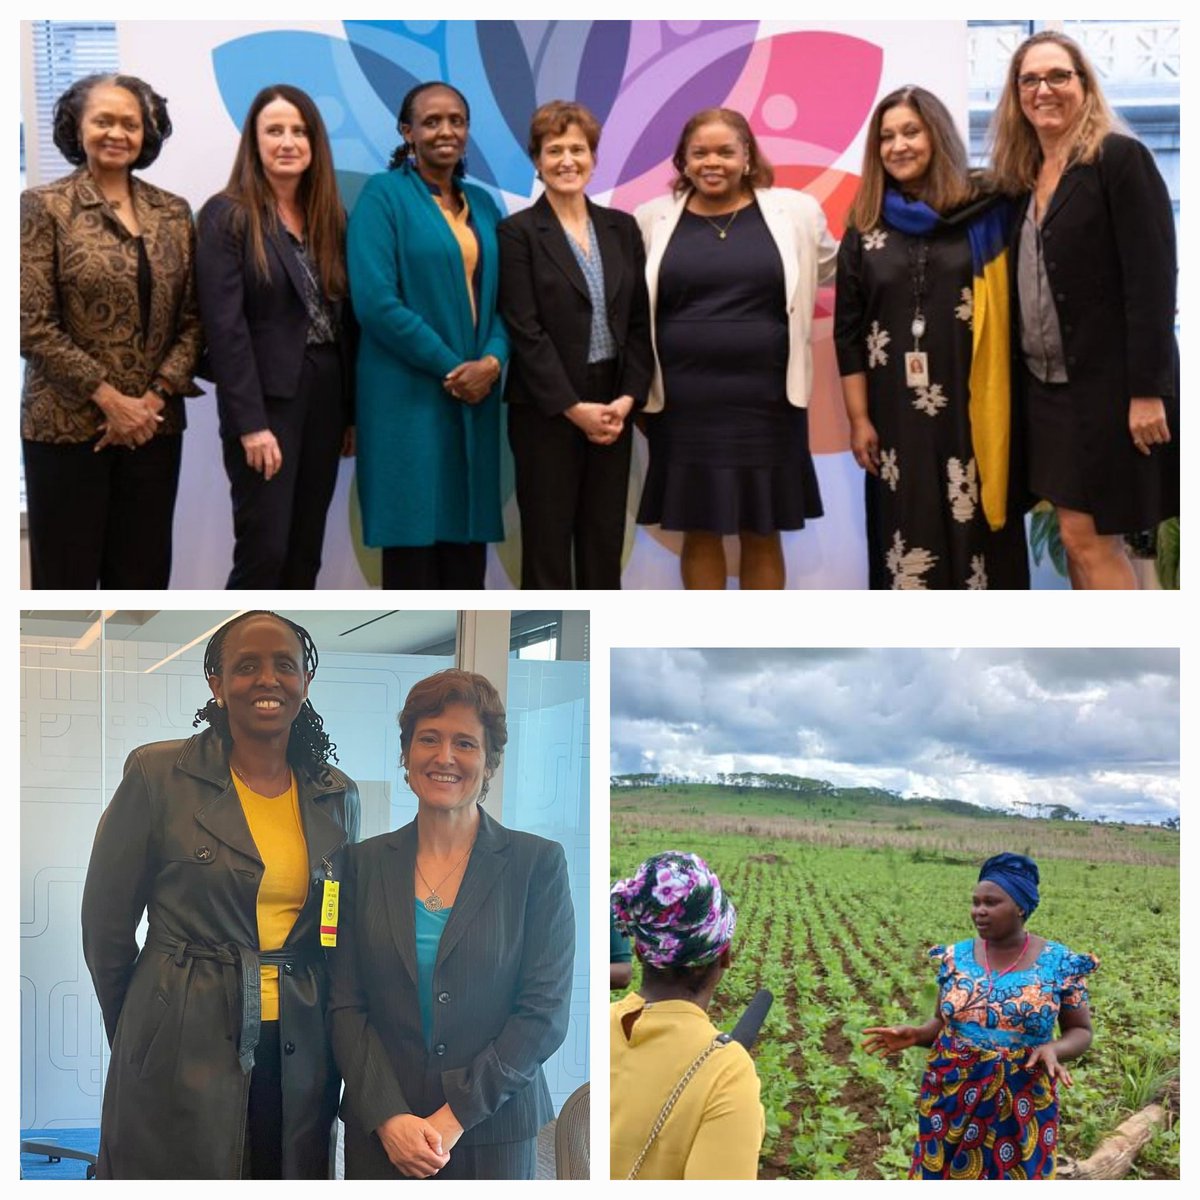 Had a great week in Washgtn DC. Leaders across institutions met to discuss how to partner for stronger Food Systems in Africa. @USAID Ass Admin @DinaEsposito10 &team discussed RUC supplmtl& impact on nutrition& inclusion plus how to support an impactful, food systems-led CAADP